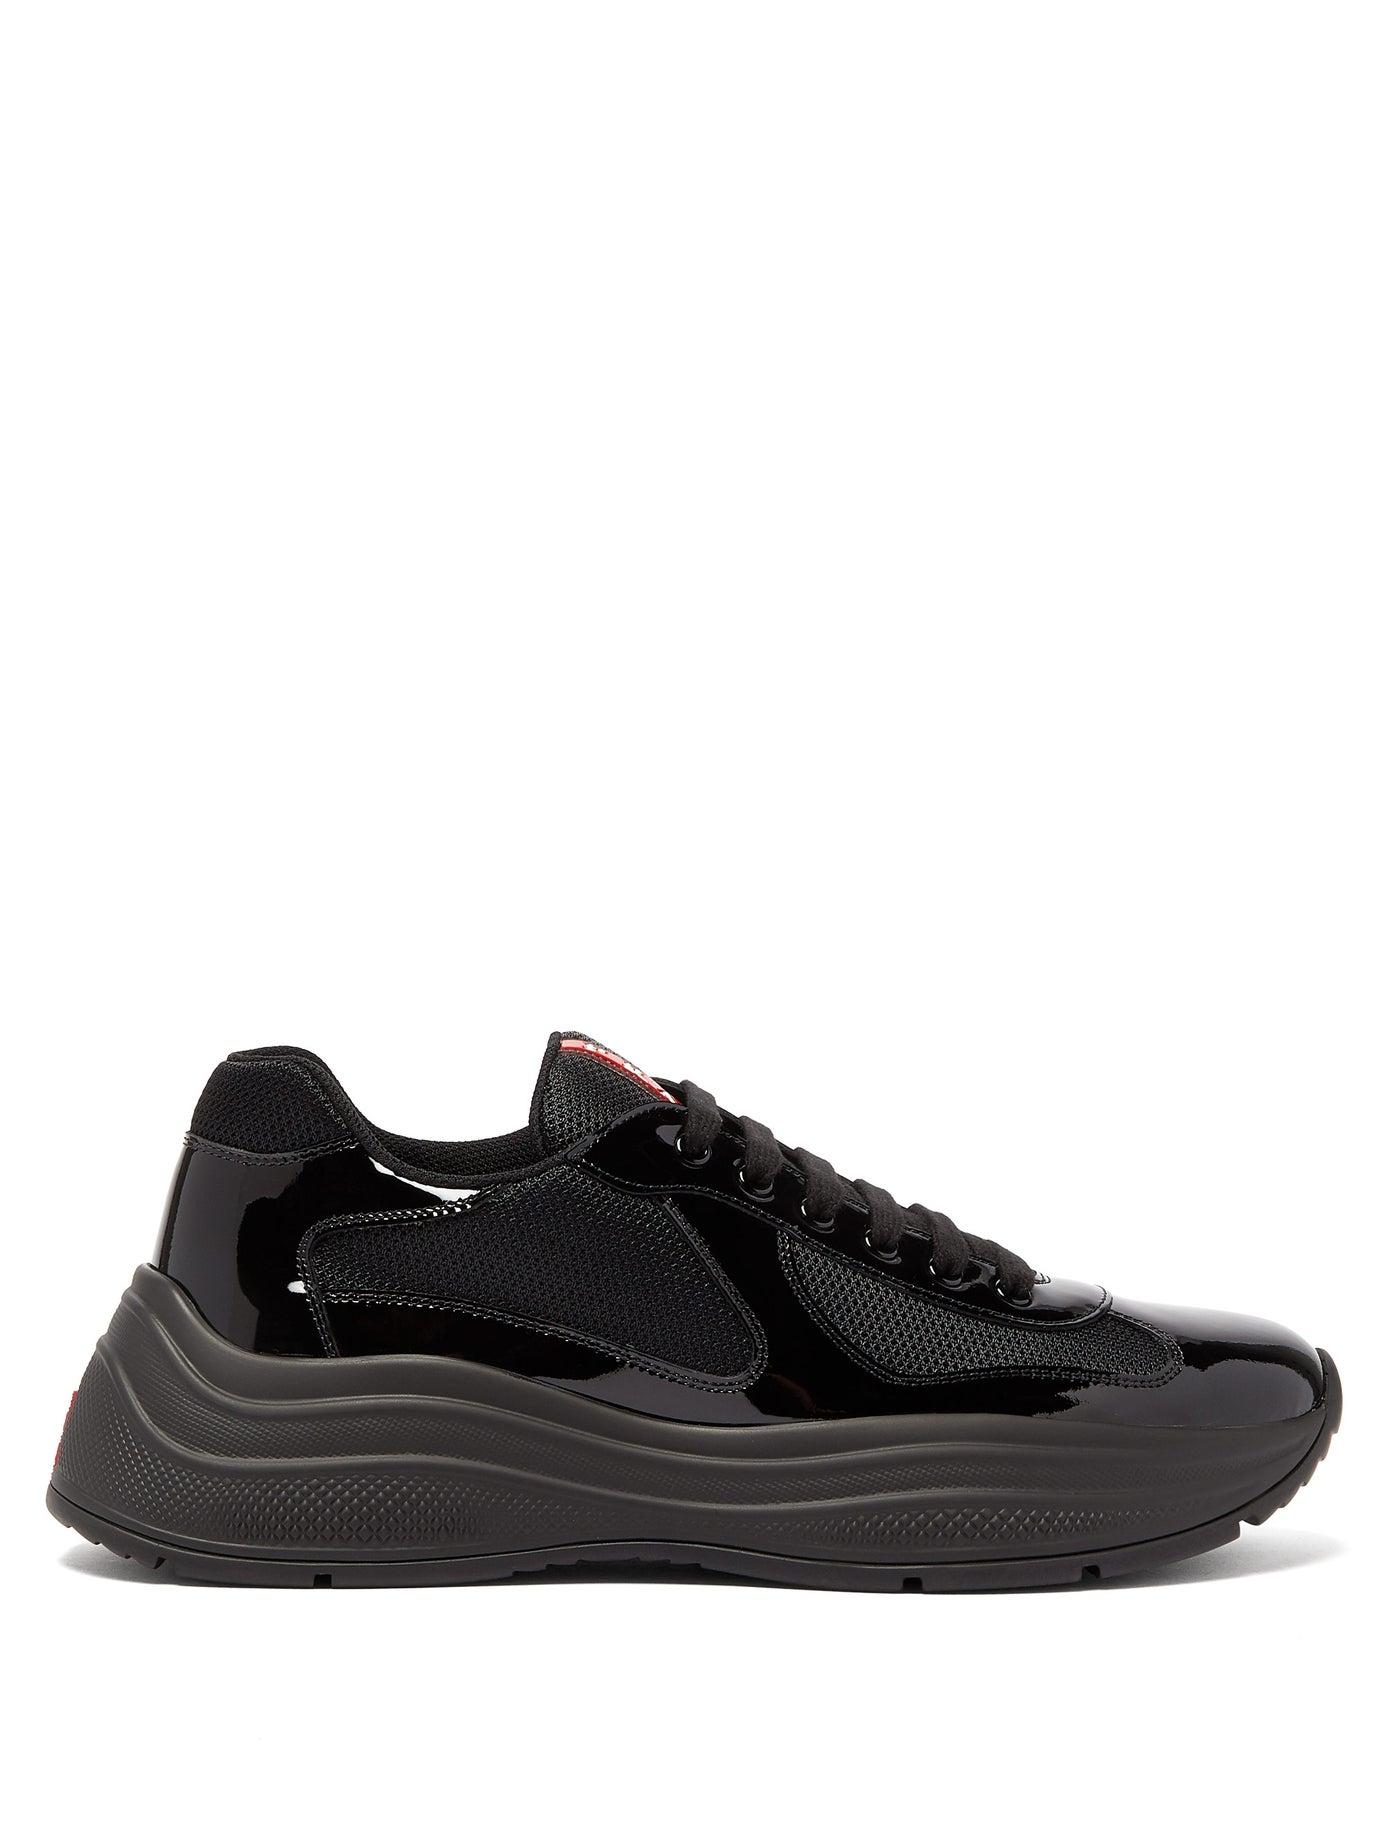 Prada America's Cup Xl Leather Sneakers in Black for Men | Lyst